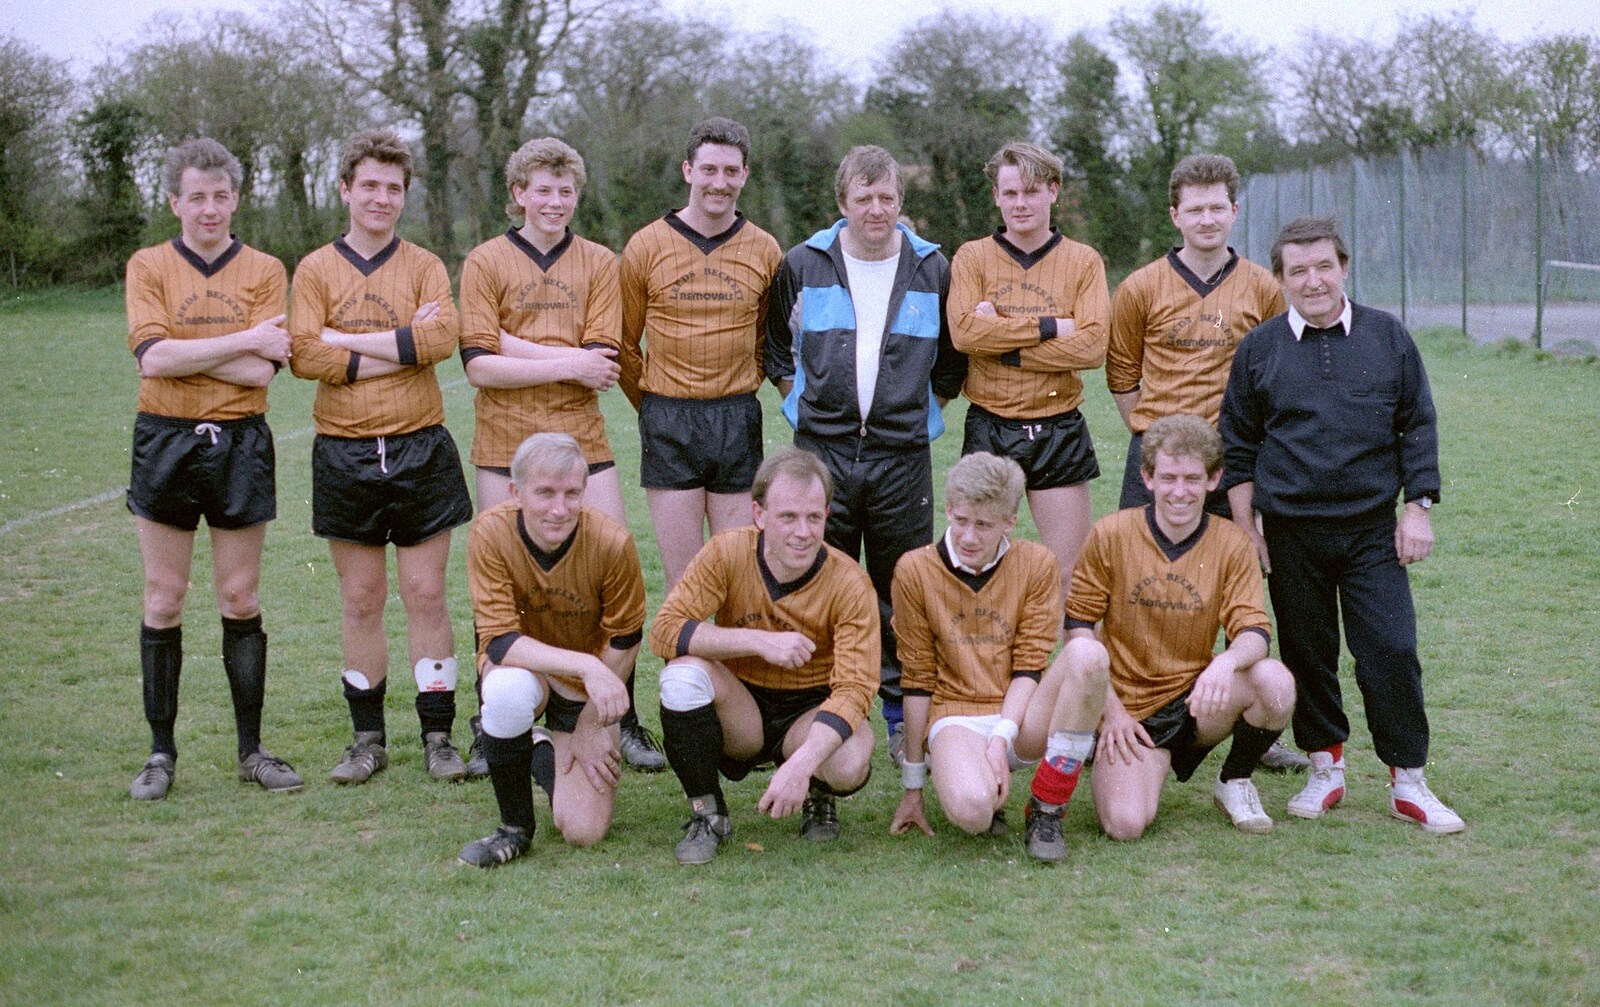 Another group photo from Soman-Wherry Footie Action, Norfolk - 25th February 1988